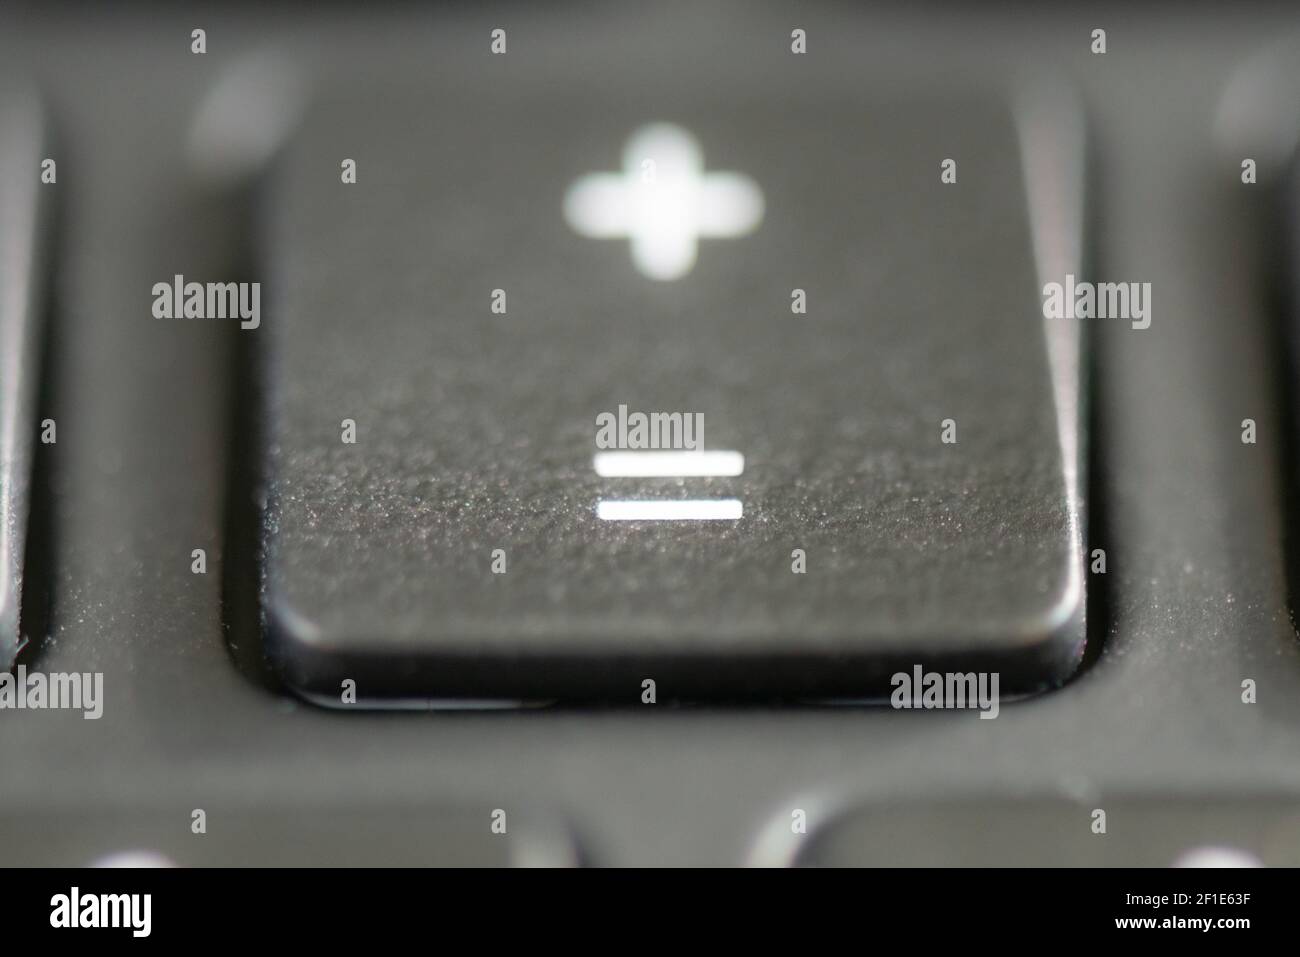 Equals plus key on a laptop keyboard Stock Photo - Alamy